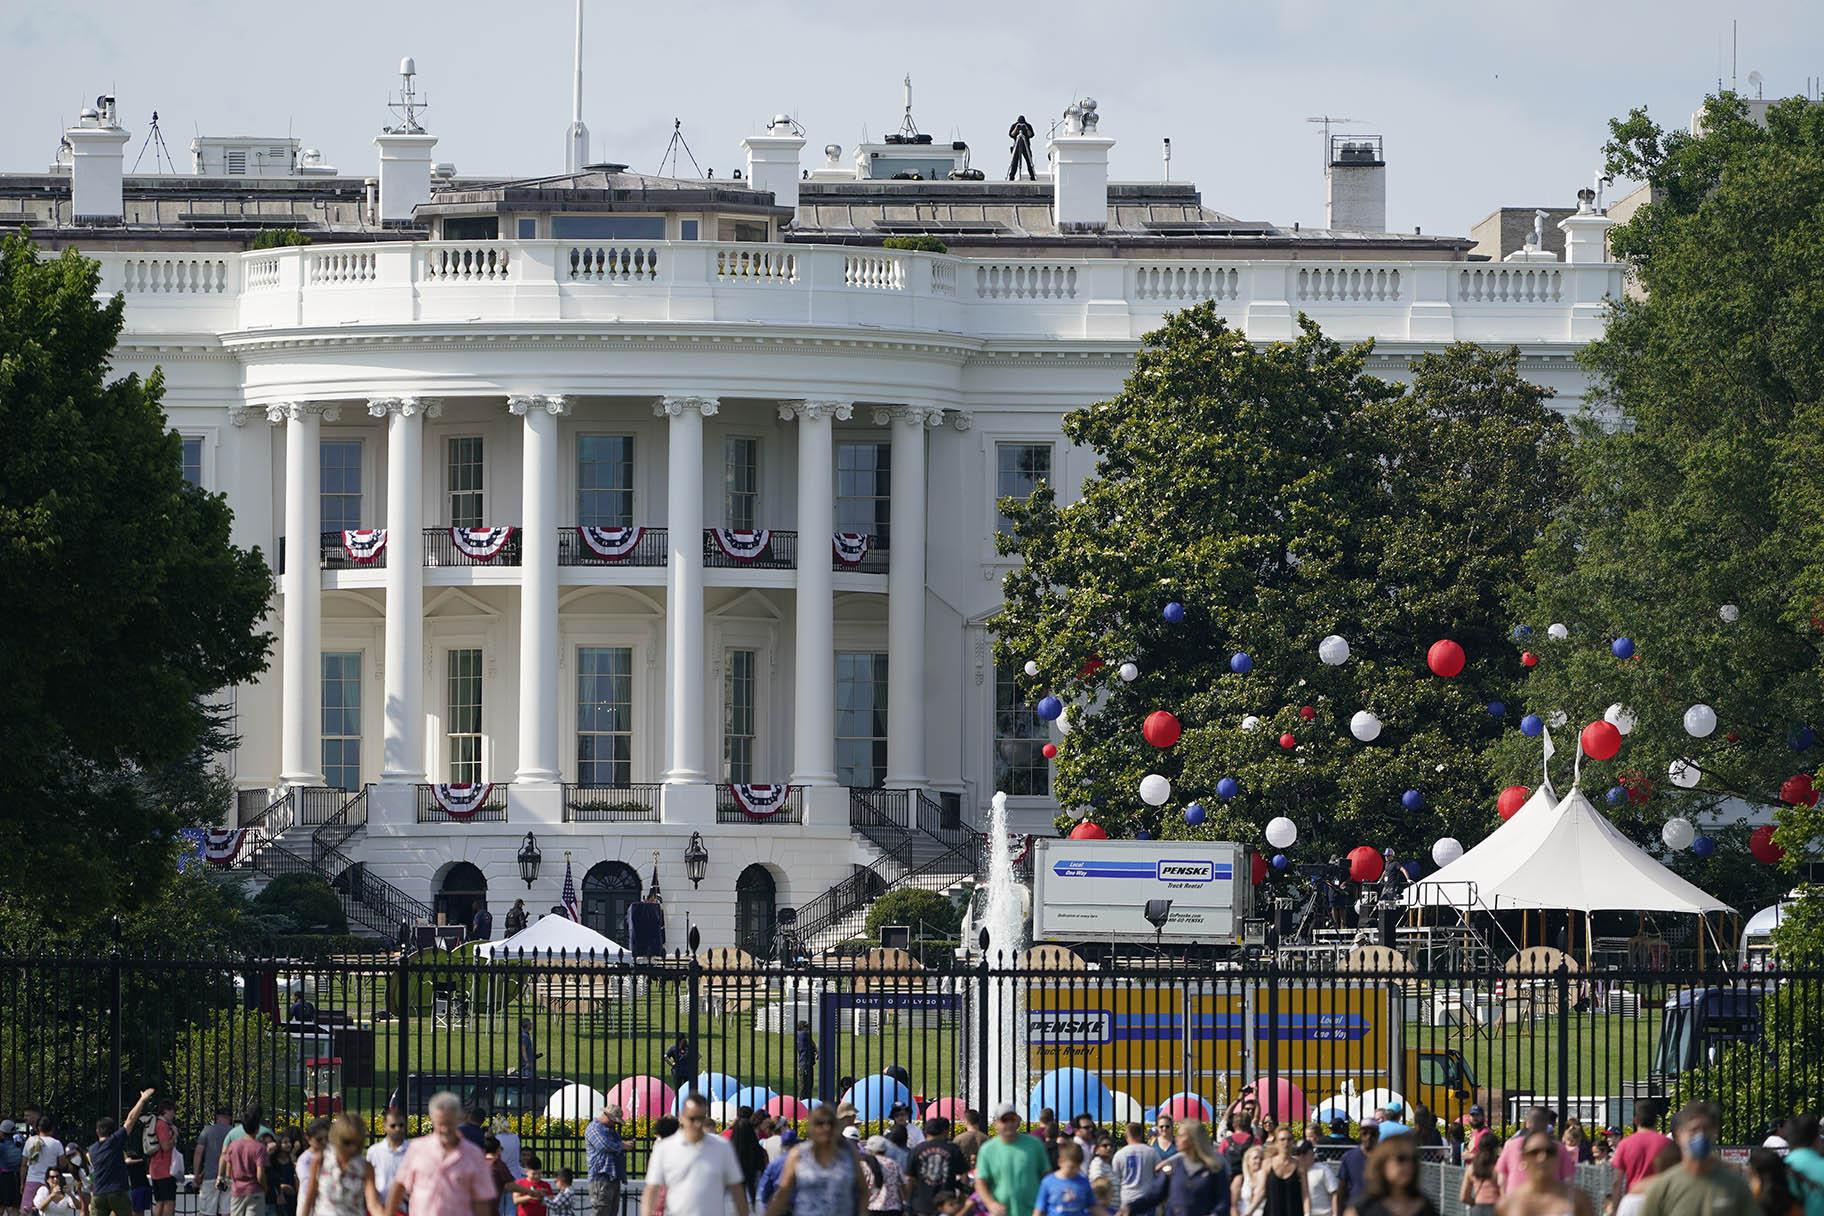 Preparations take place for an Independence Day celebration on the South Lawn of the White House, Saturday, July 3, 2021, in Washington. (AP Photo / Patrick Semansky)